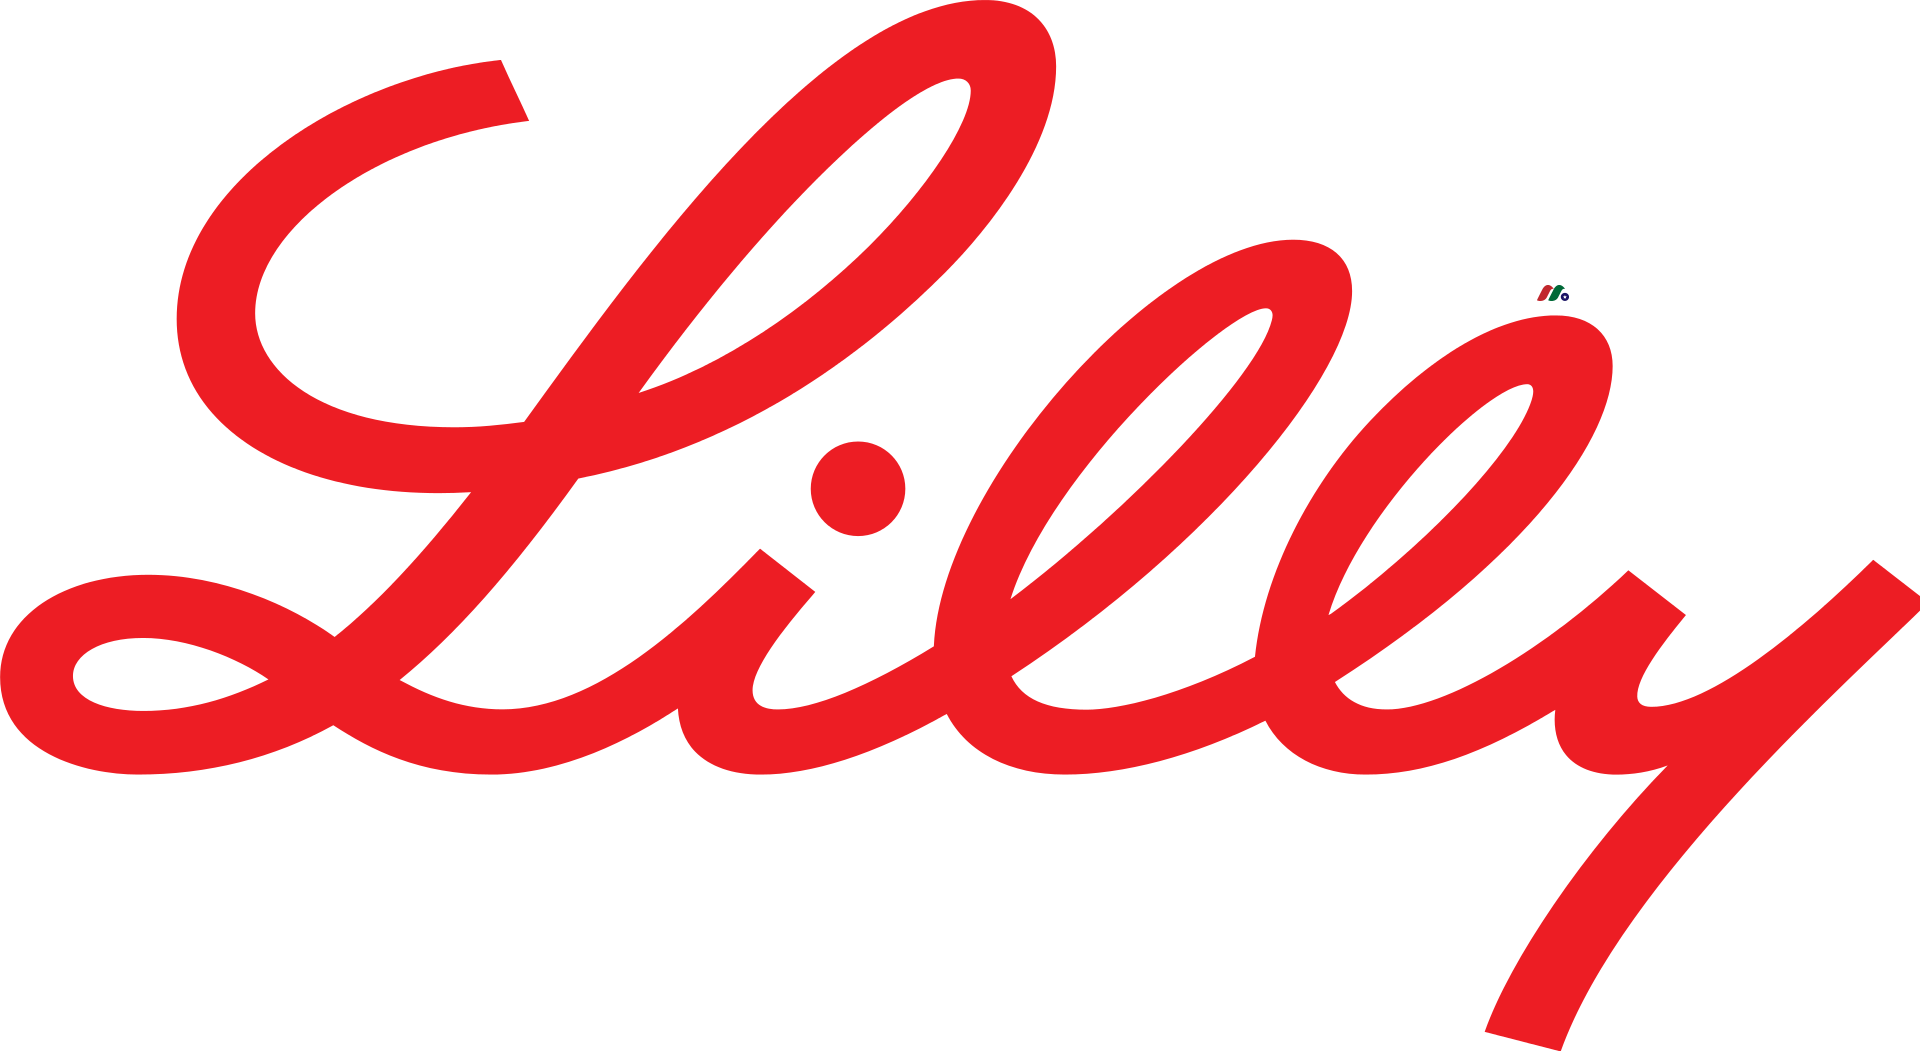 Eli Lilly's Obesity Drug: A Prescription for Wealth and Health